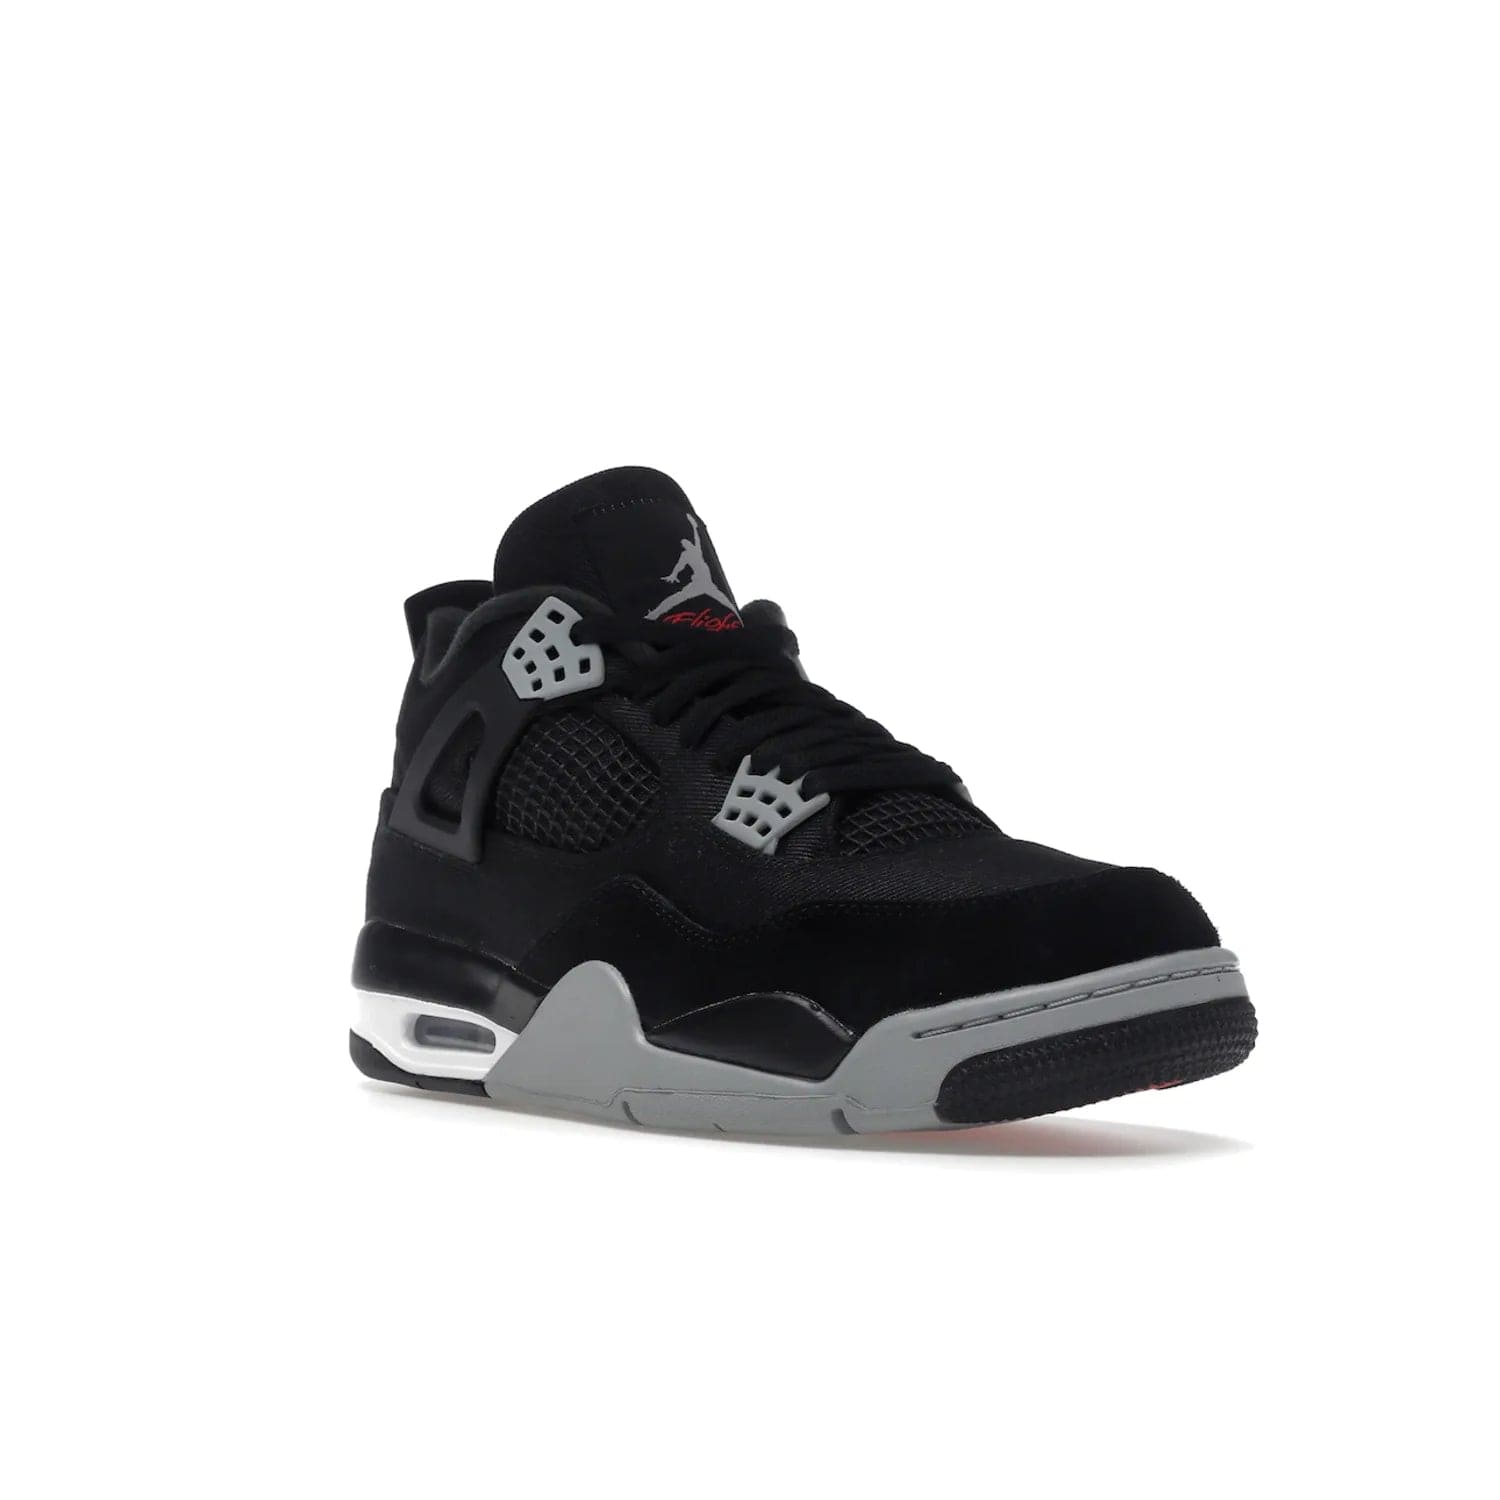 Jordan 4 Retro SE Black Canvas - Image 6 - Only at www.BallersClubKickz.com - The Air Jordan 4 Retro SE Black Canvas brings timeless style and modern luxury. Classic mid-top sneaker in black canvas and grey suede with tonal Jumpman logo, Flight logo and polyurethane midsole with visible Air-sole cushioning. Refresh your sneaker collection and rock the Air Jordan 4 Retro SE Black Canvas.